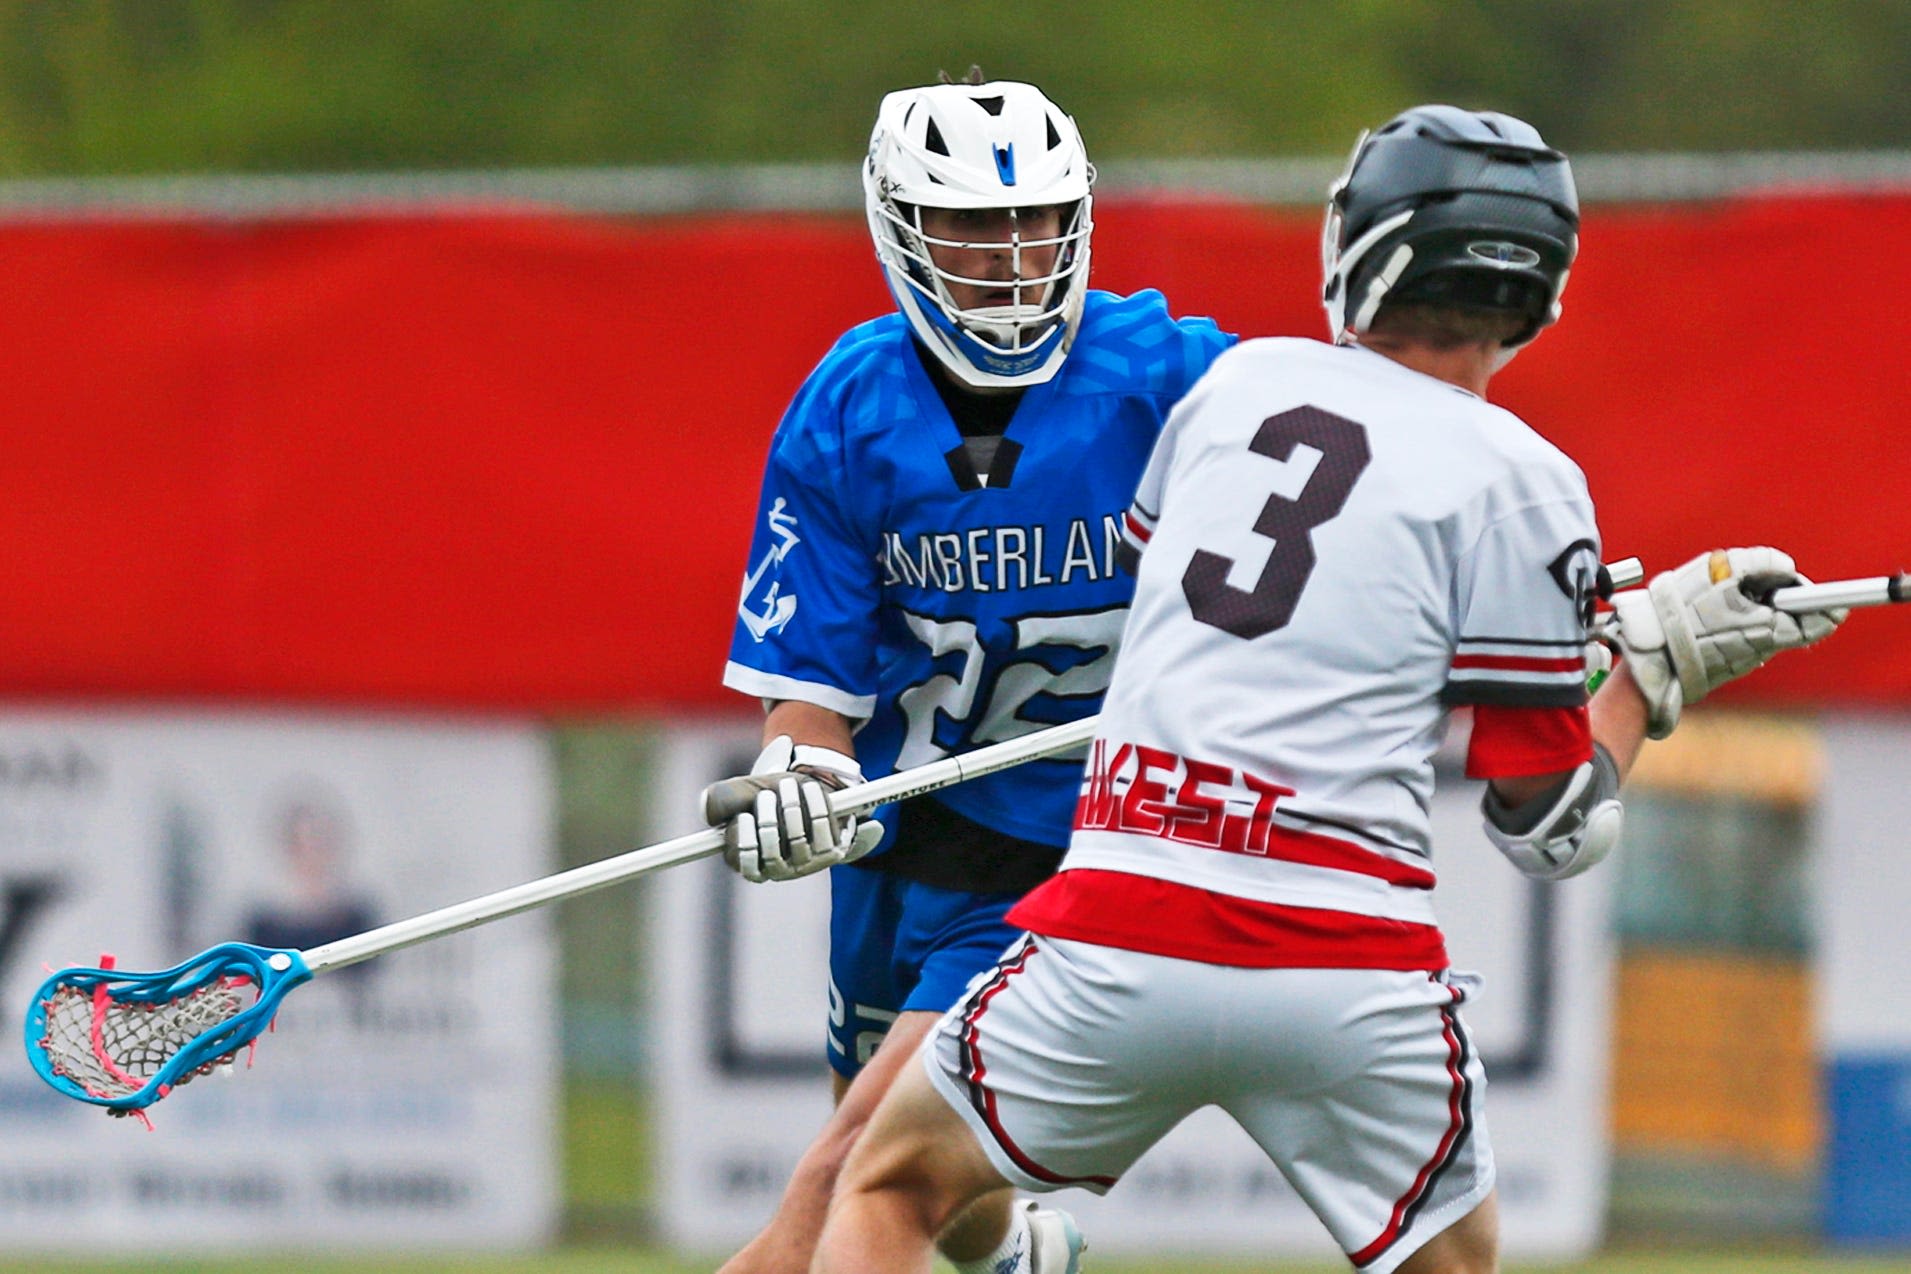 Here's how Cranston West boys lacrosse's late magic topped Cumberland